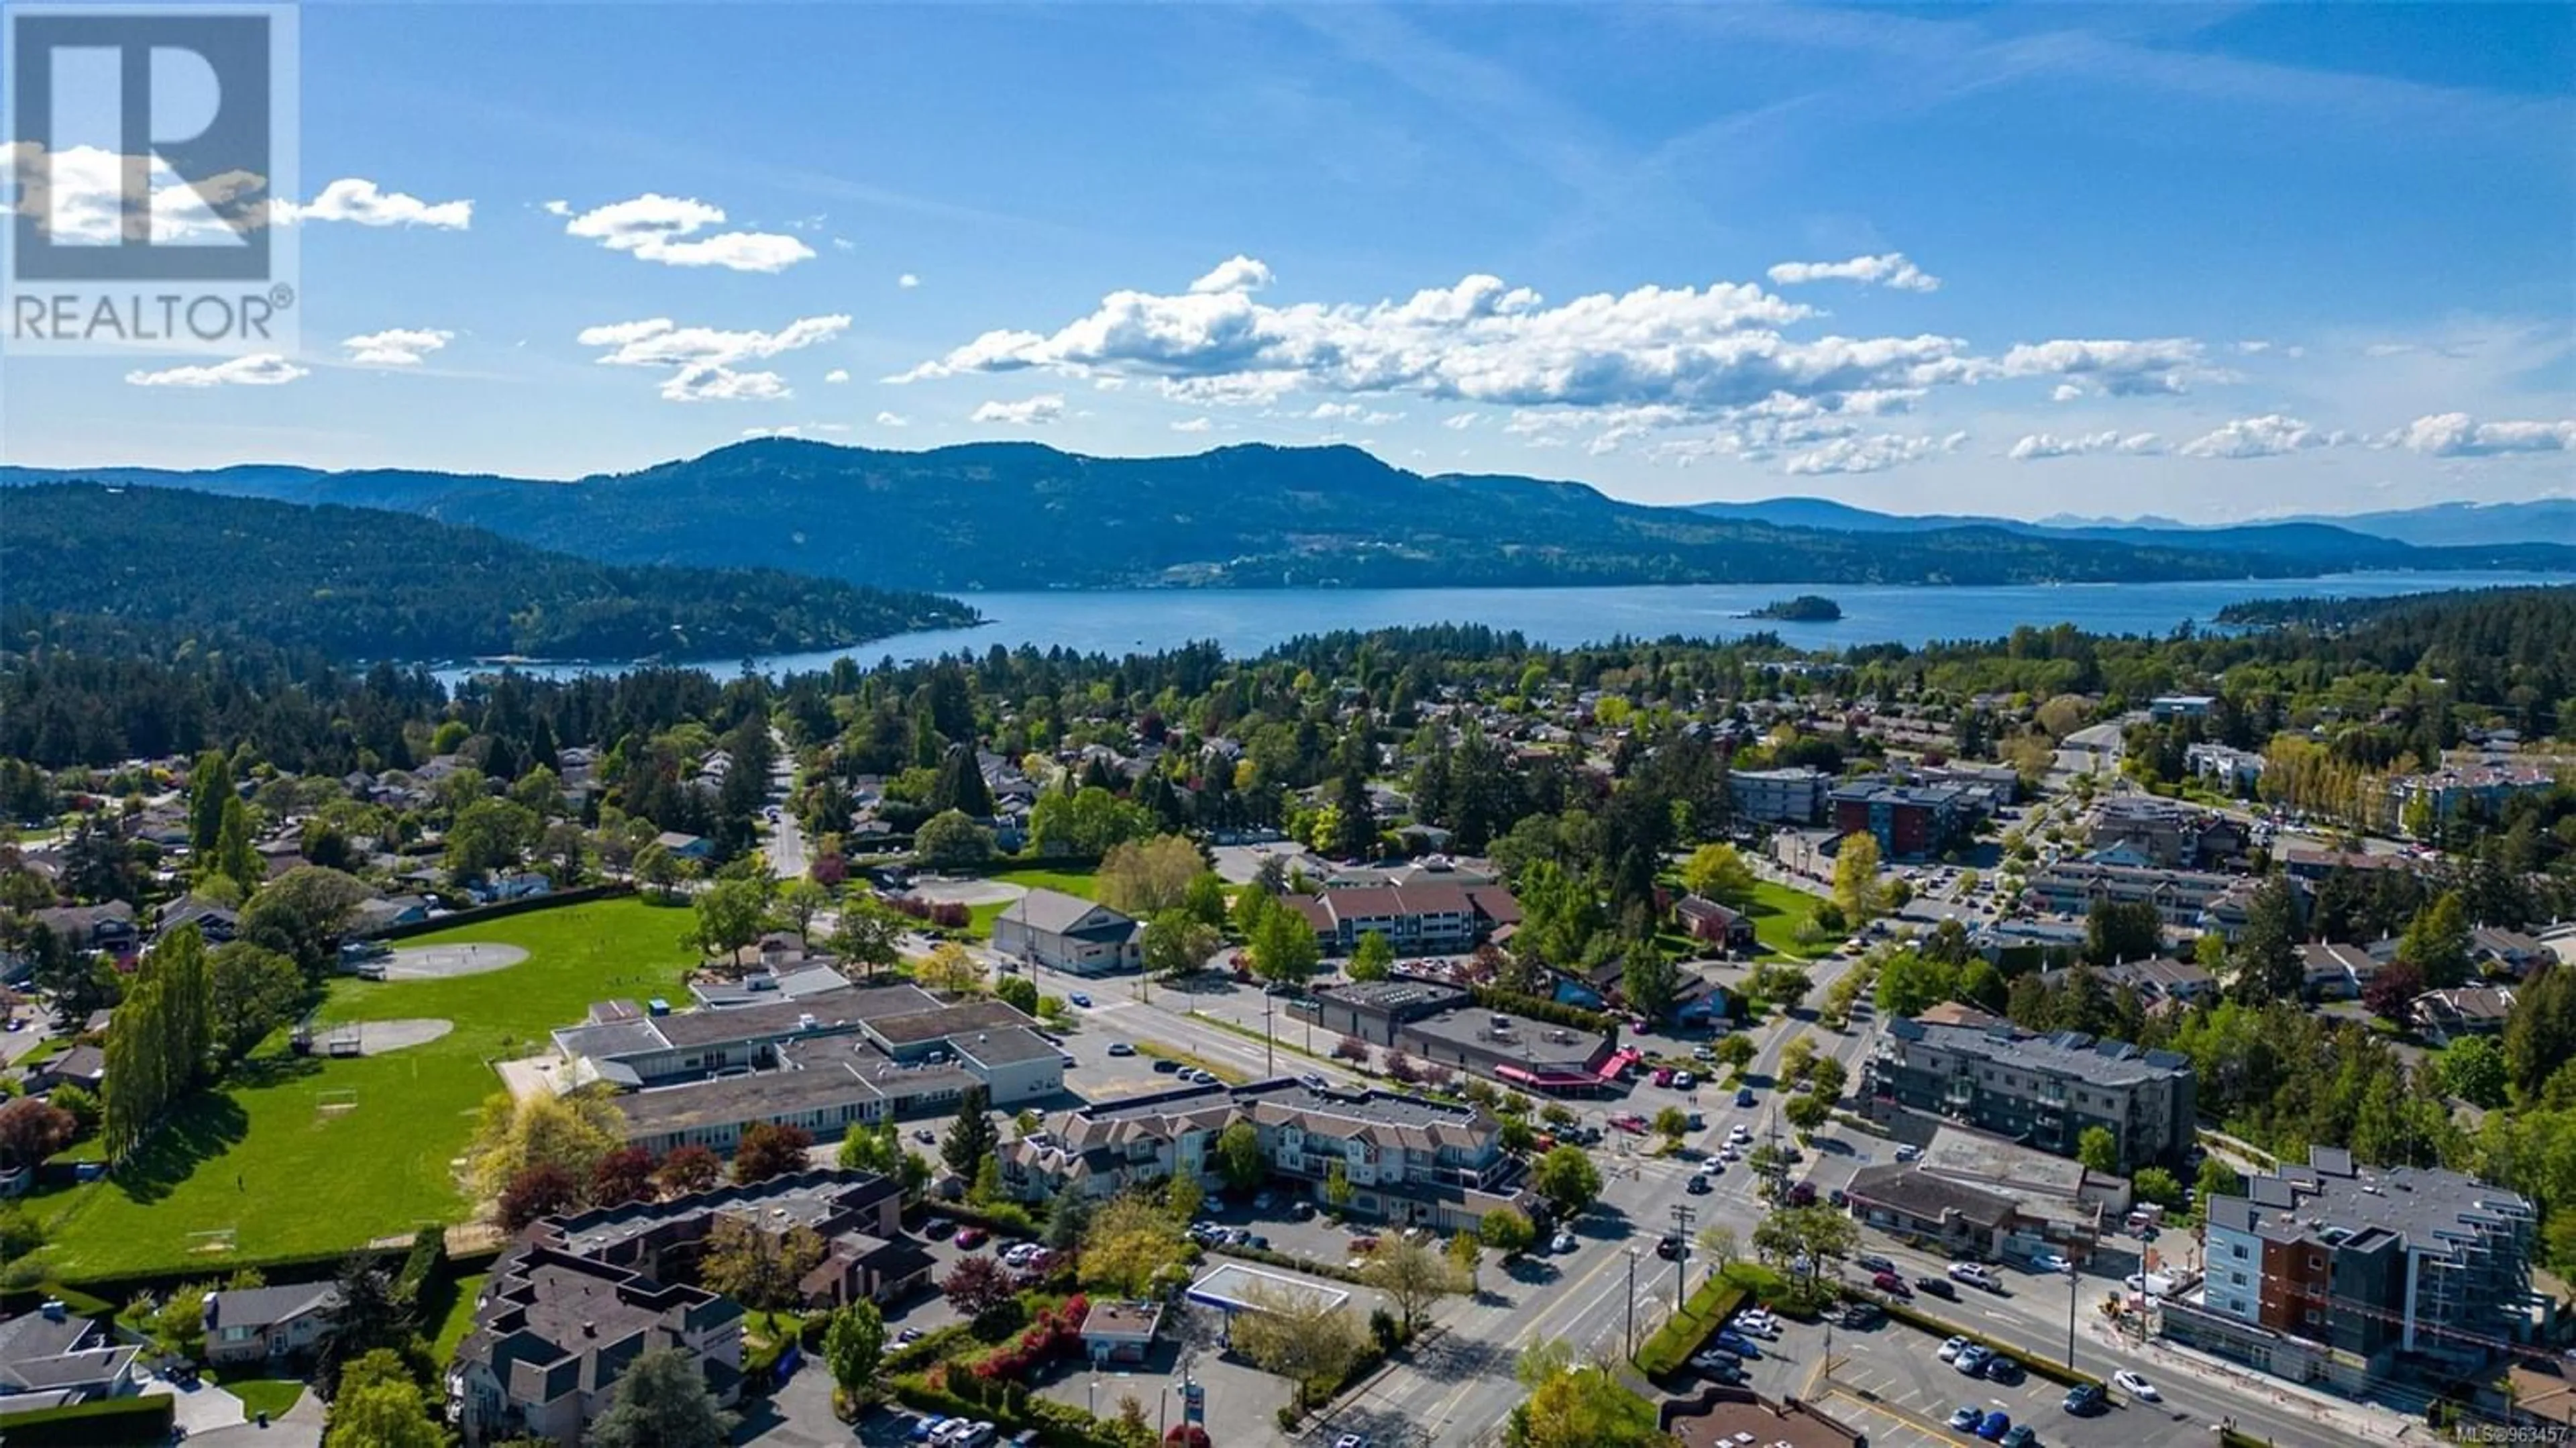 Lakeview for 209 7088 West Saanich Rd, Central Saanich British Columbia V8M1P9